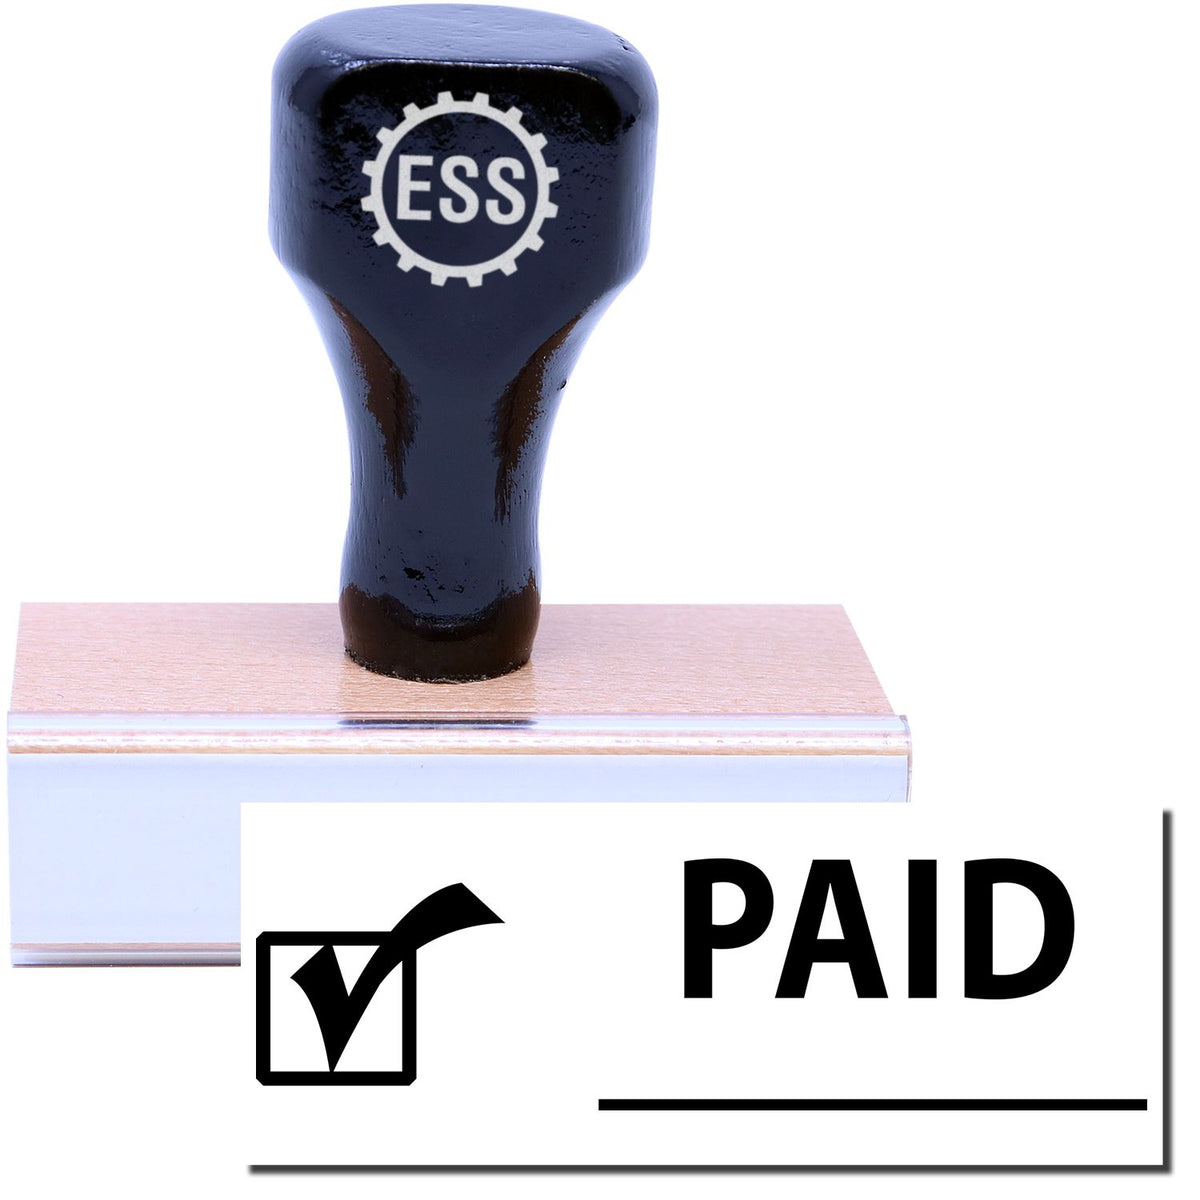 A stock office rubber stamp with a stamped image showing how the text &quot;PAID&quot; in a large font with a line underneath the text and a checkmark icon on the left side is displayed after stamping.